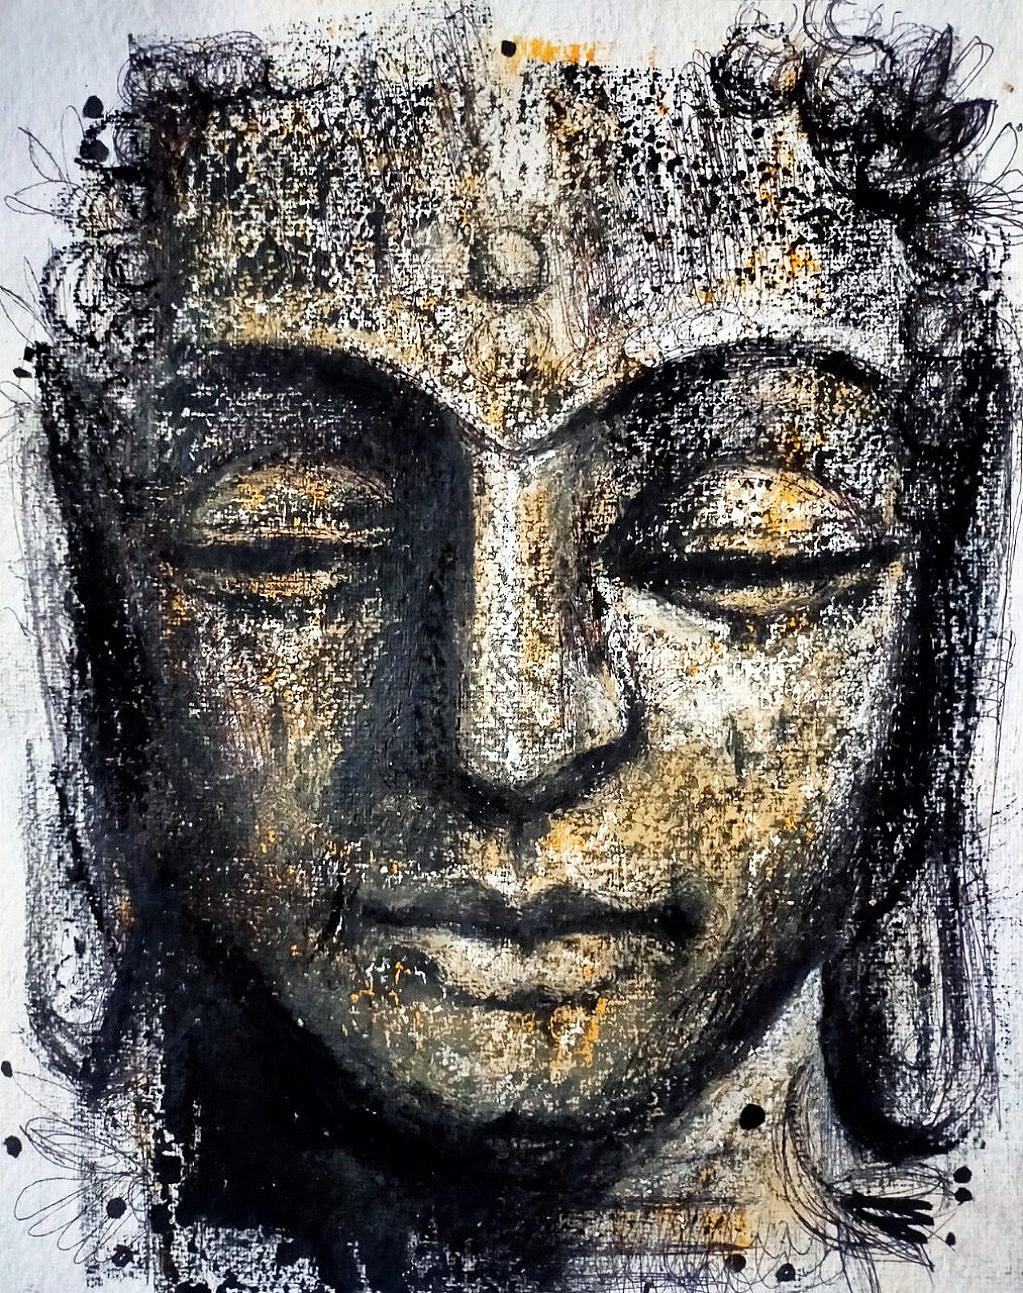 Lord Buddha, Mixed Media on Paper, Yellow Black by Contemporary Artist-In Stock - Mixed Media Art by Sekhar Kar